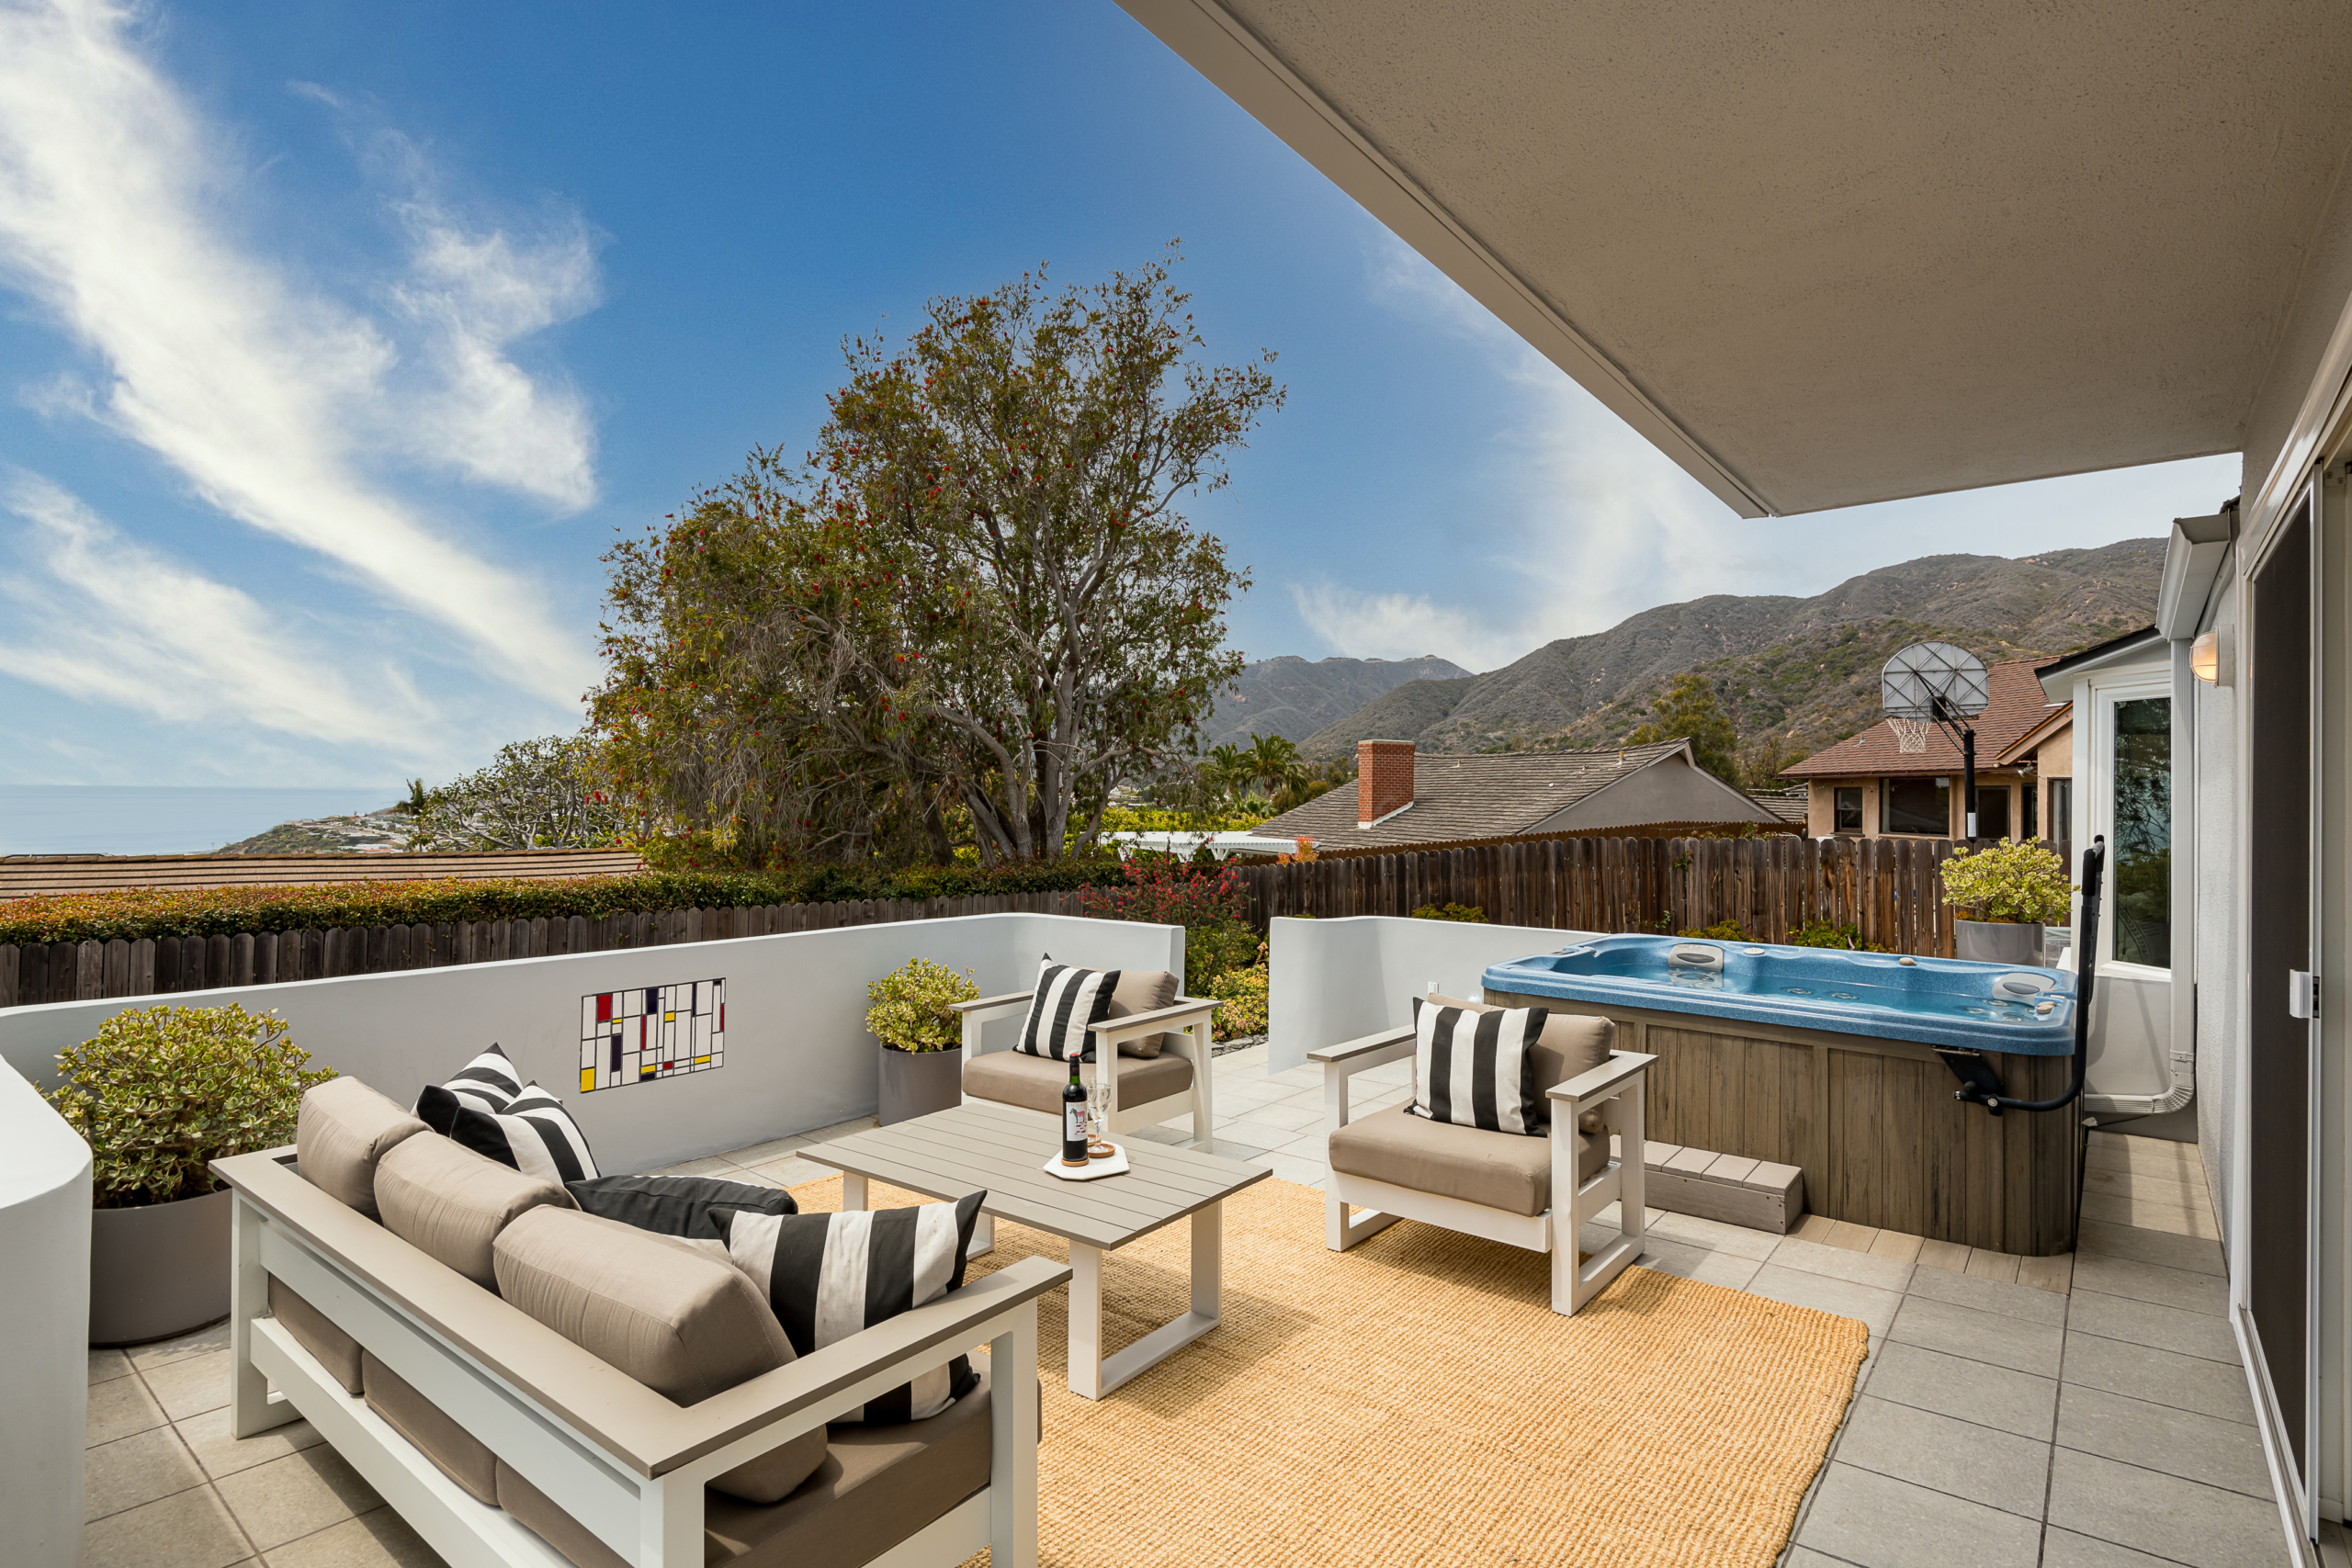 Patio entertaining area with view of mountains and ocean